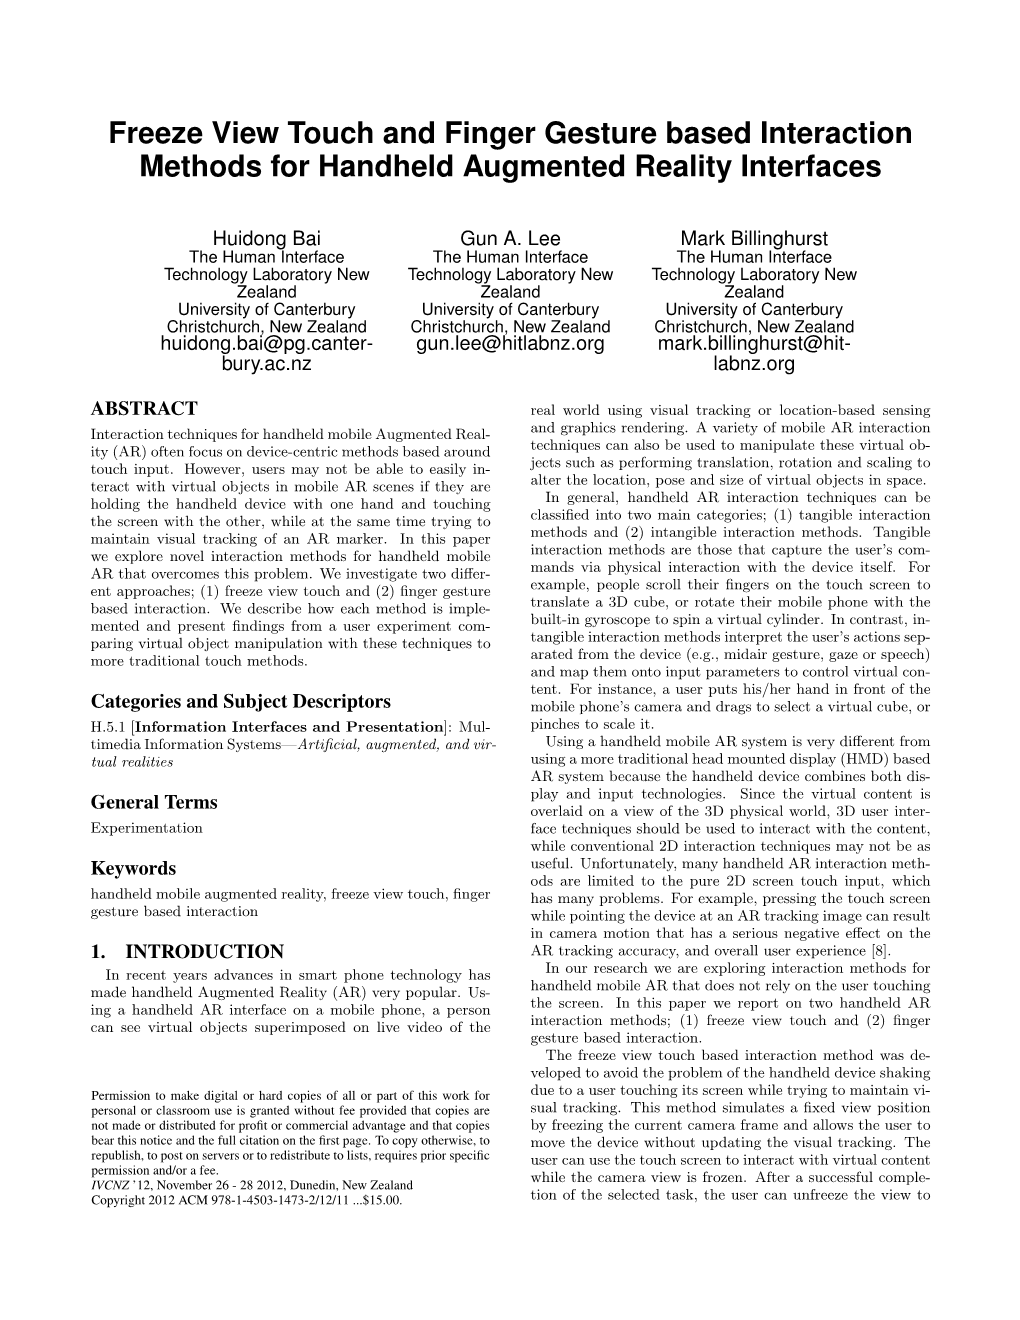 Freeze View Touch and Finger Gesture Based Interaction Methods for Handheld Augmented Reality Interfaces